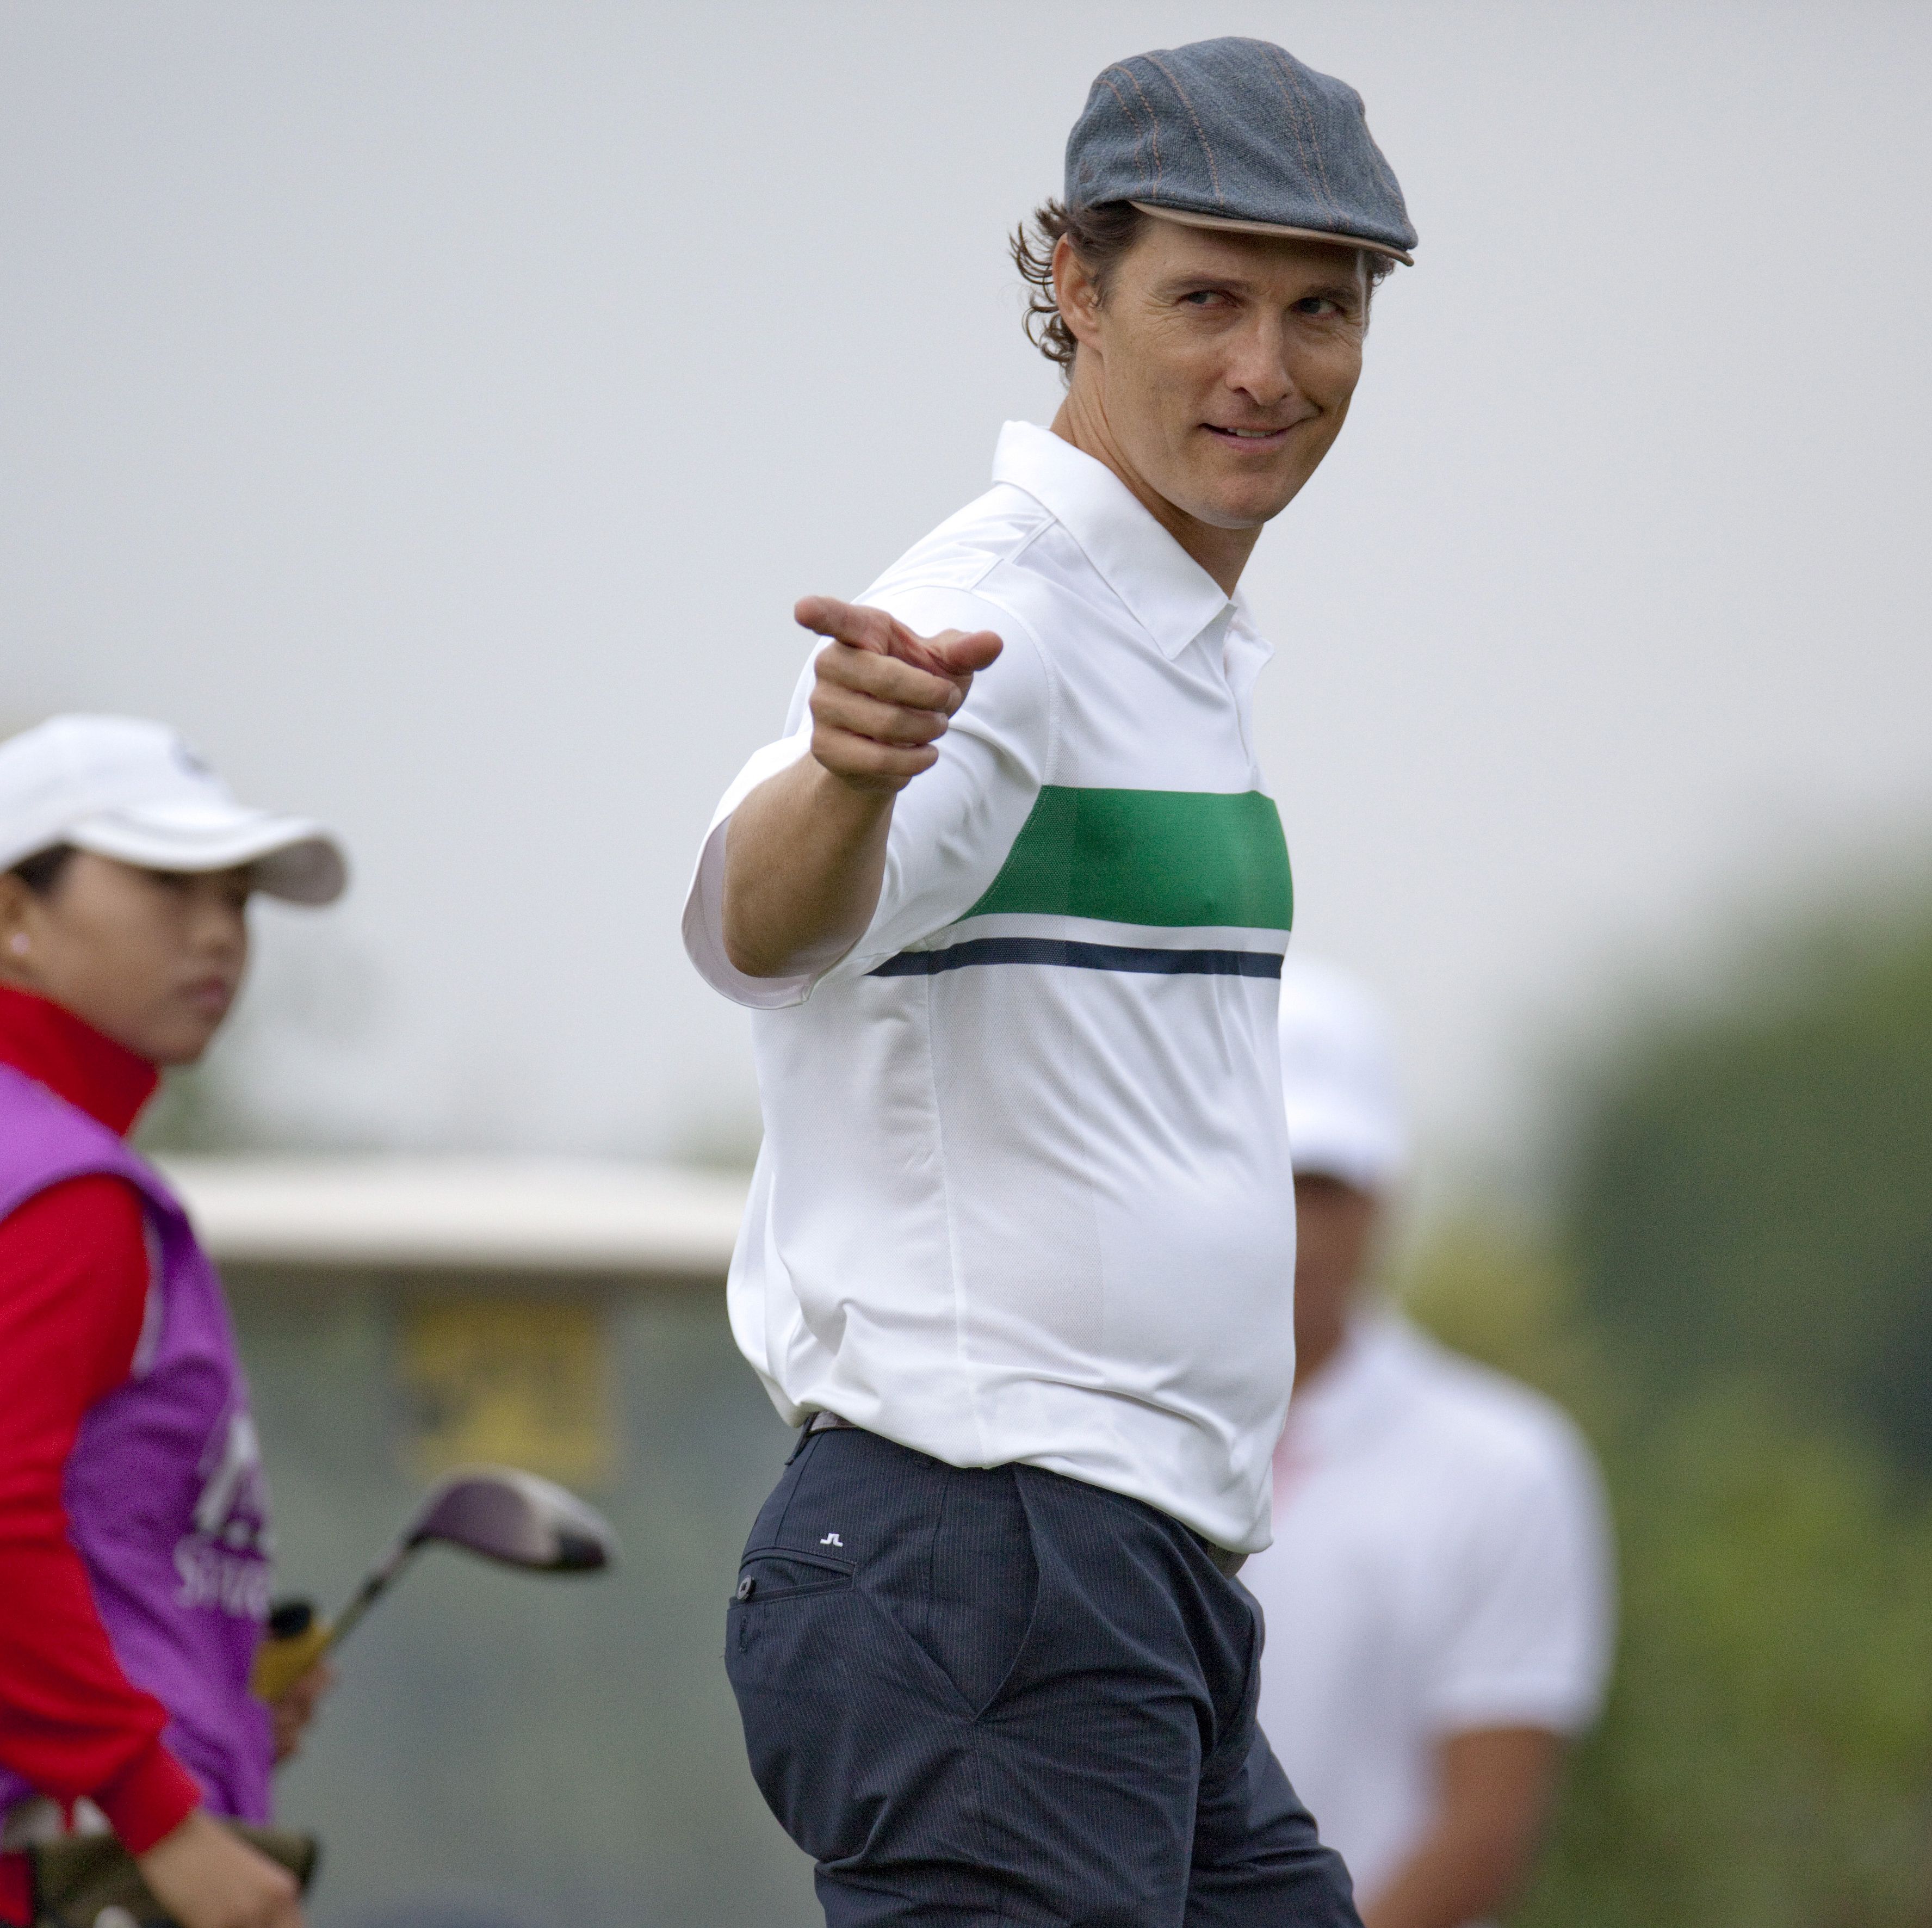 11 Golf Shirts to Up Your Game and Your Style